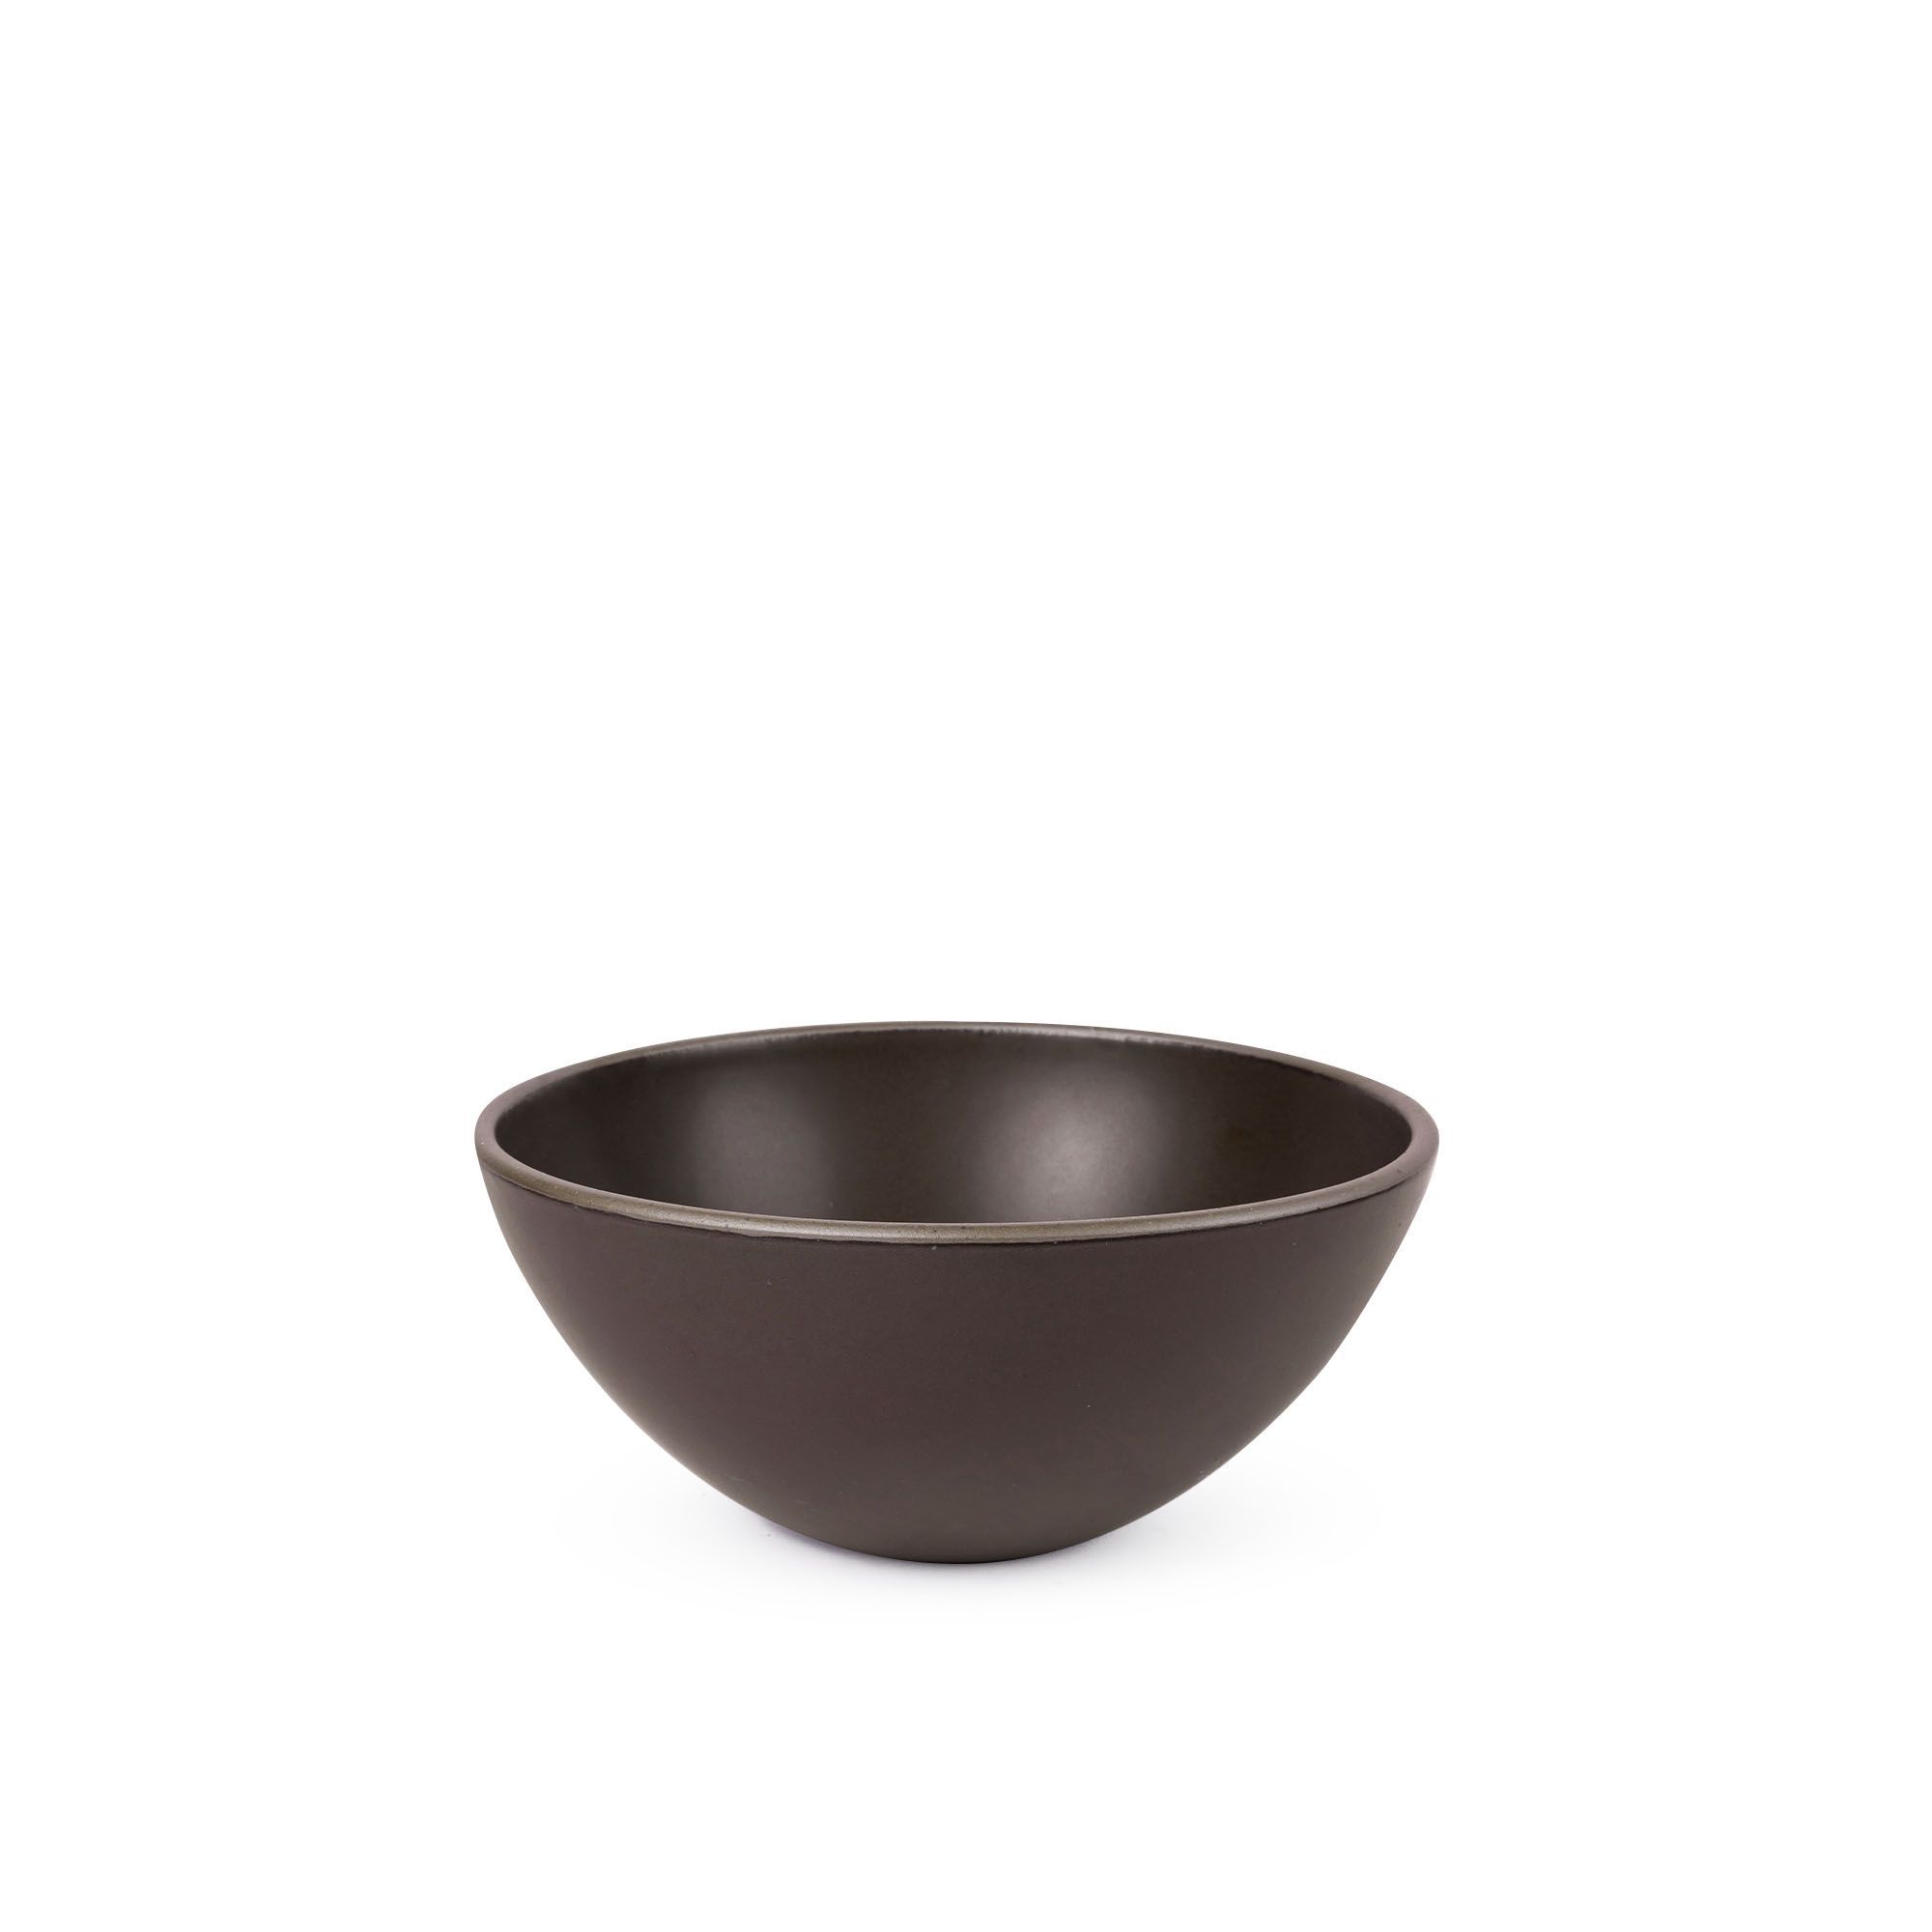 Popcorn inside a medium rounded ceramic bowl in a dark cool brown color featuring iron speckles and an unglazed rim